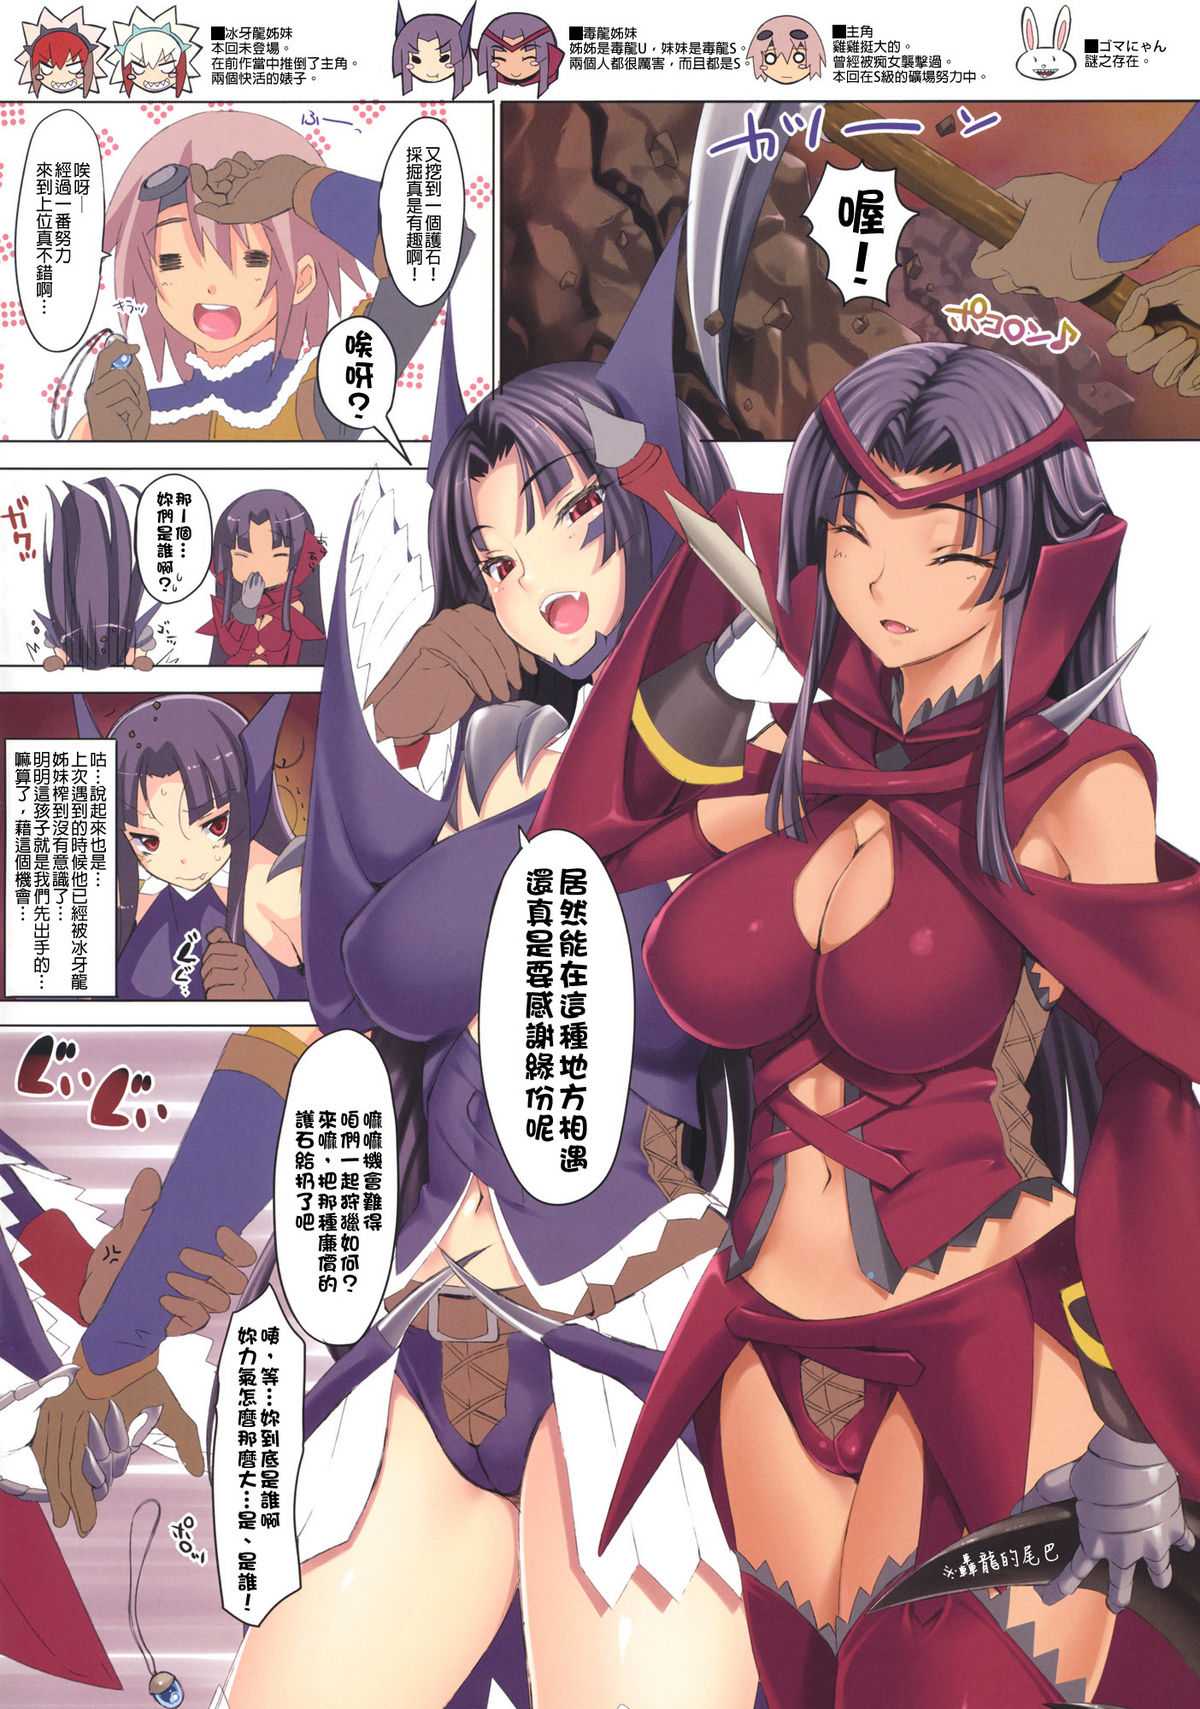 (C80) [Clesta] CL-orz17 (Monster Hunter) [Chinese][final個人漢化] (C80) (同人誌) [クレスタ(呉マサヒロ)] CL-orz 17 (モンスターハンター)[final個人漢化]